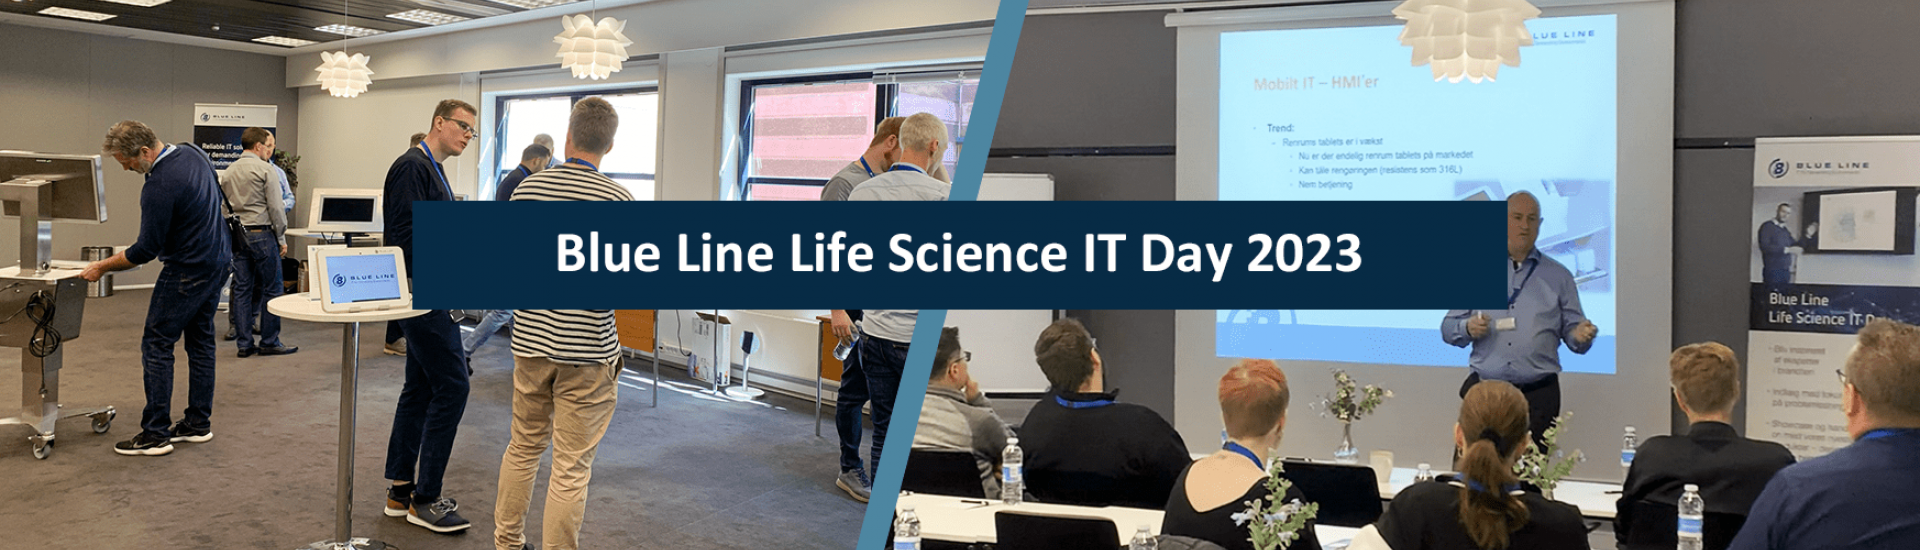 INVITATION – Blue Line Life Science IT Day 2023